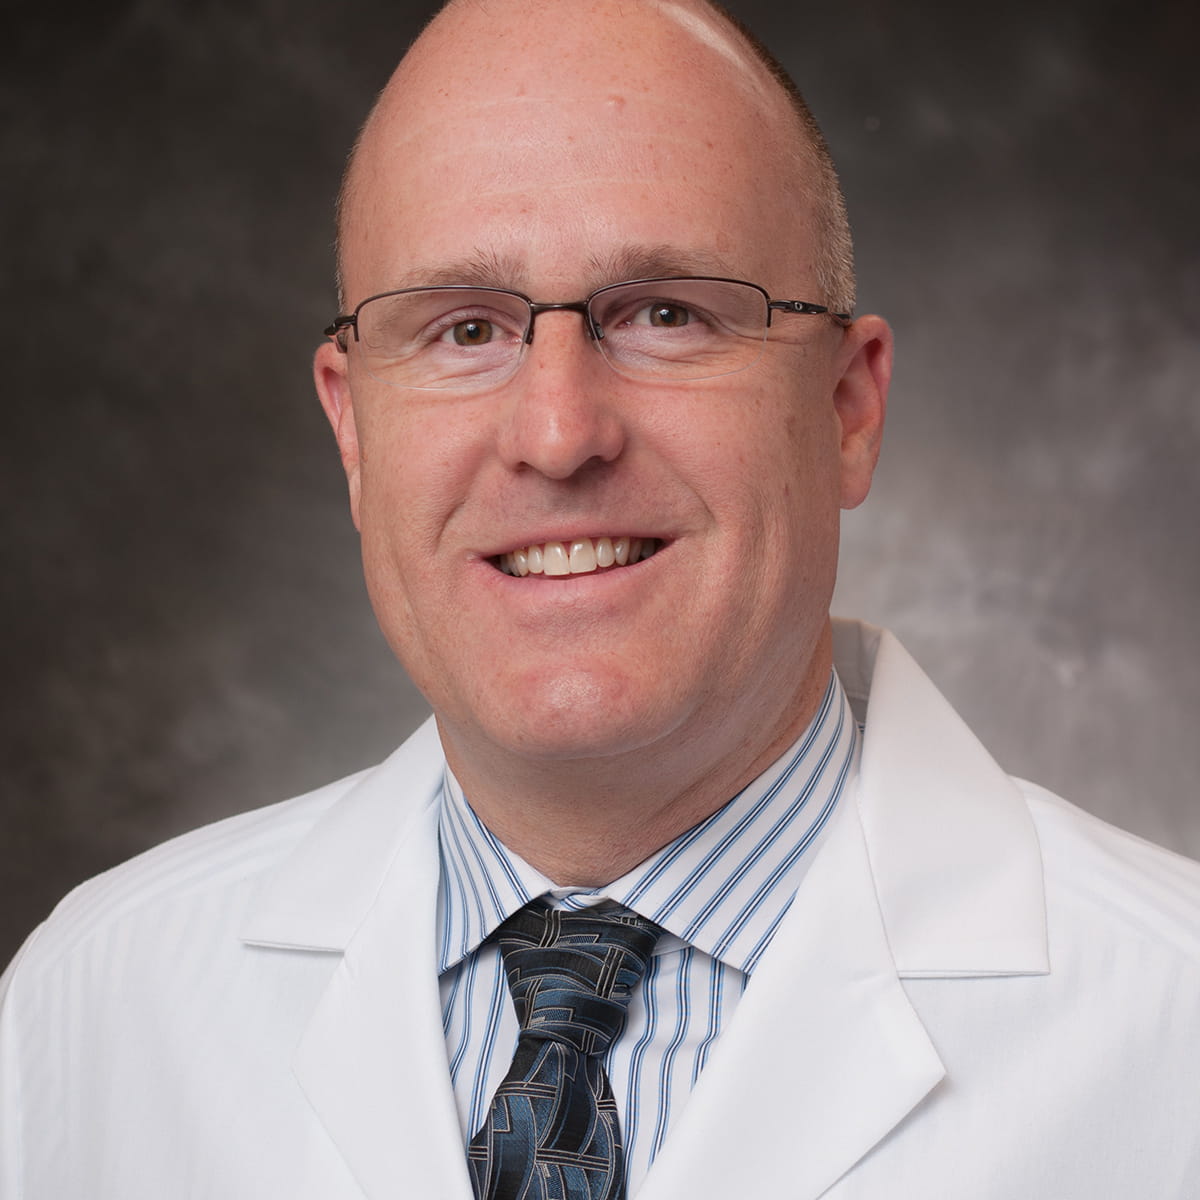 A friendly headshot of Grant Taylor, MD